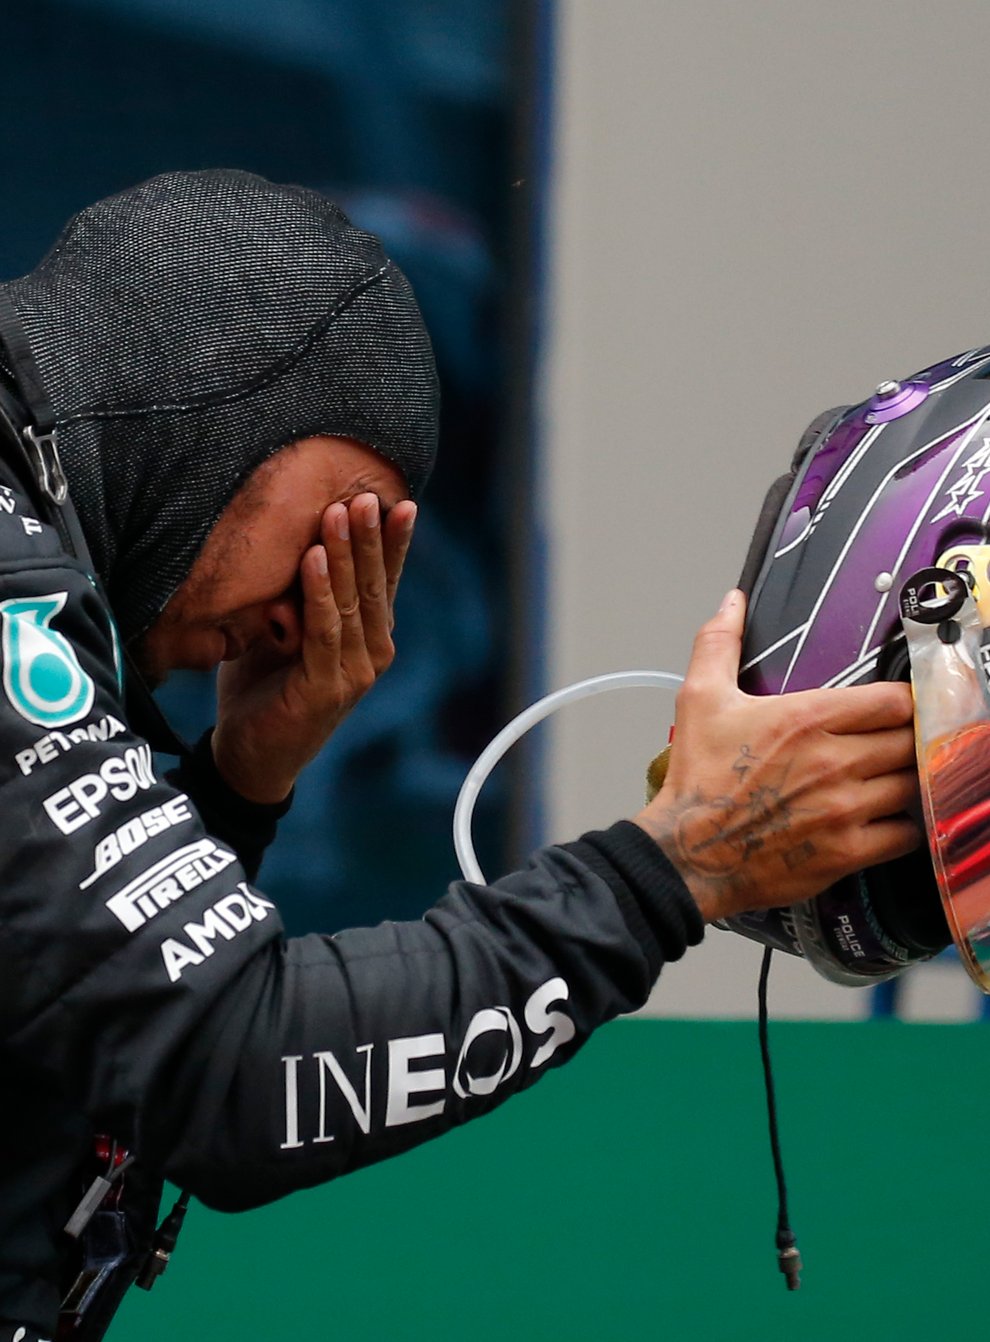 An emotional Lewis Hamilton clinched his seventh world title in Turkey